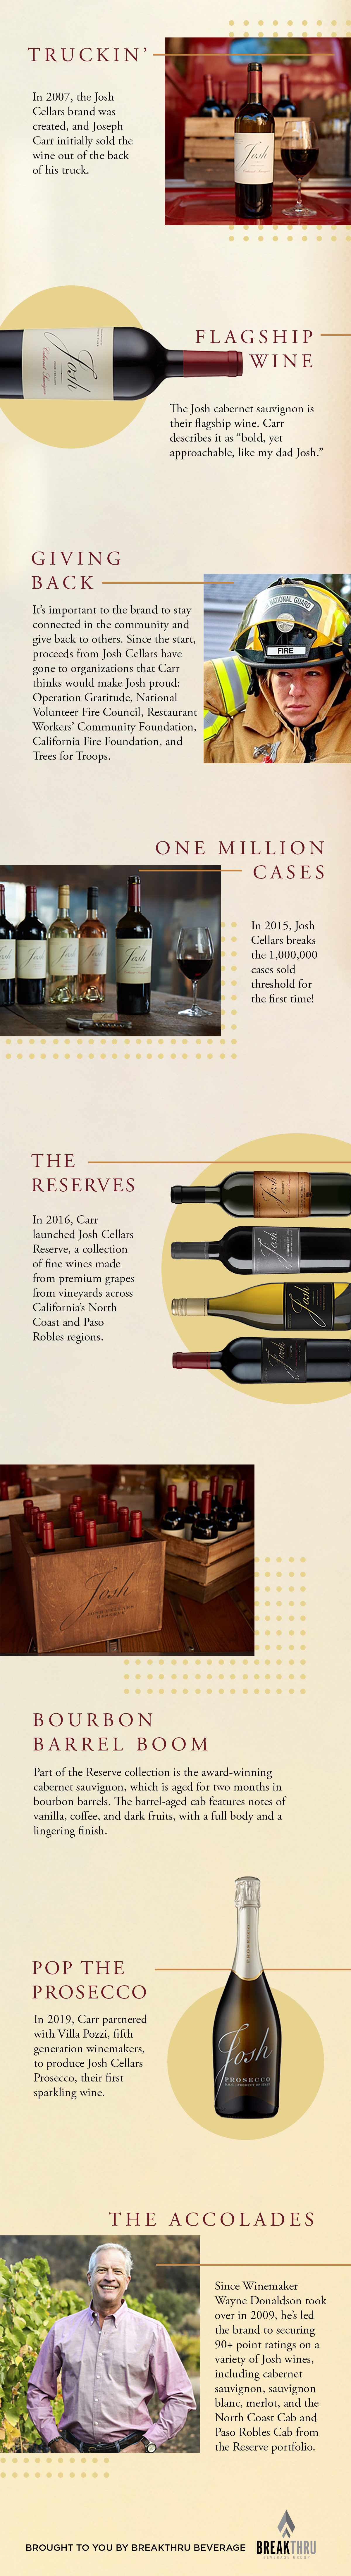 So You Think You Know Josh Cellars infographic